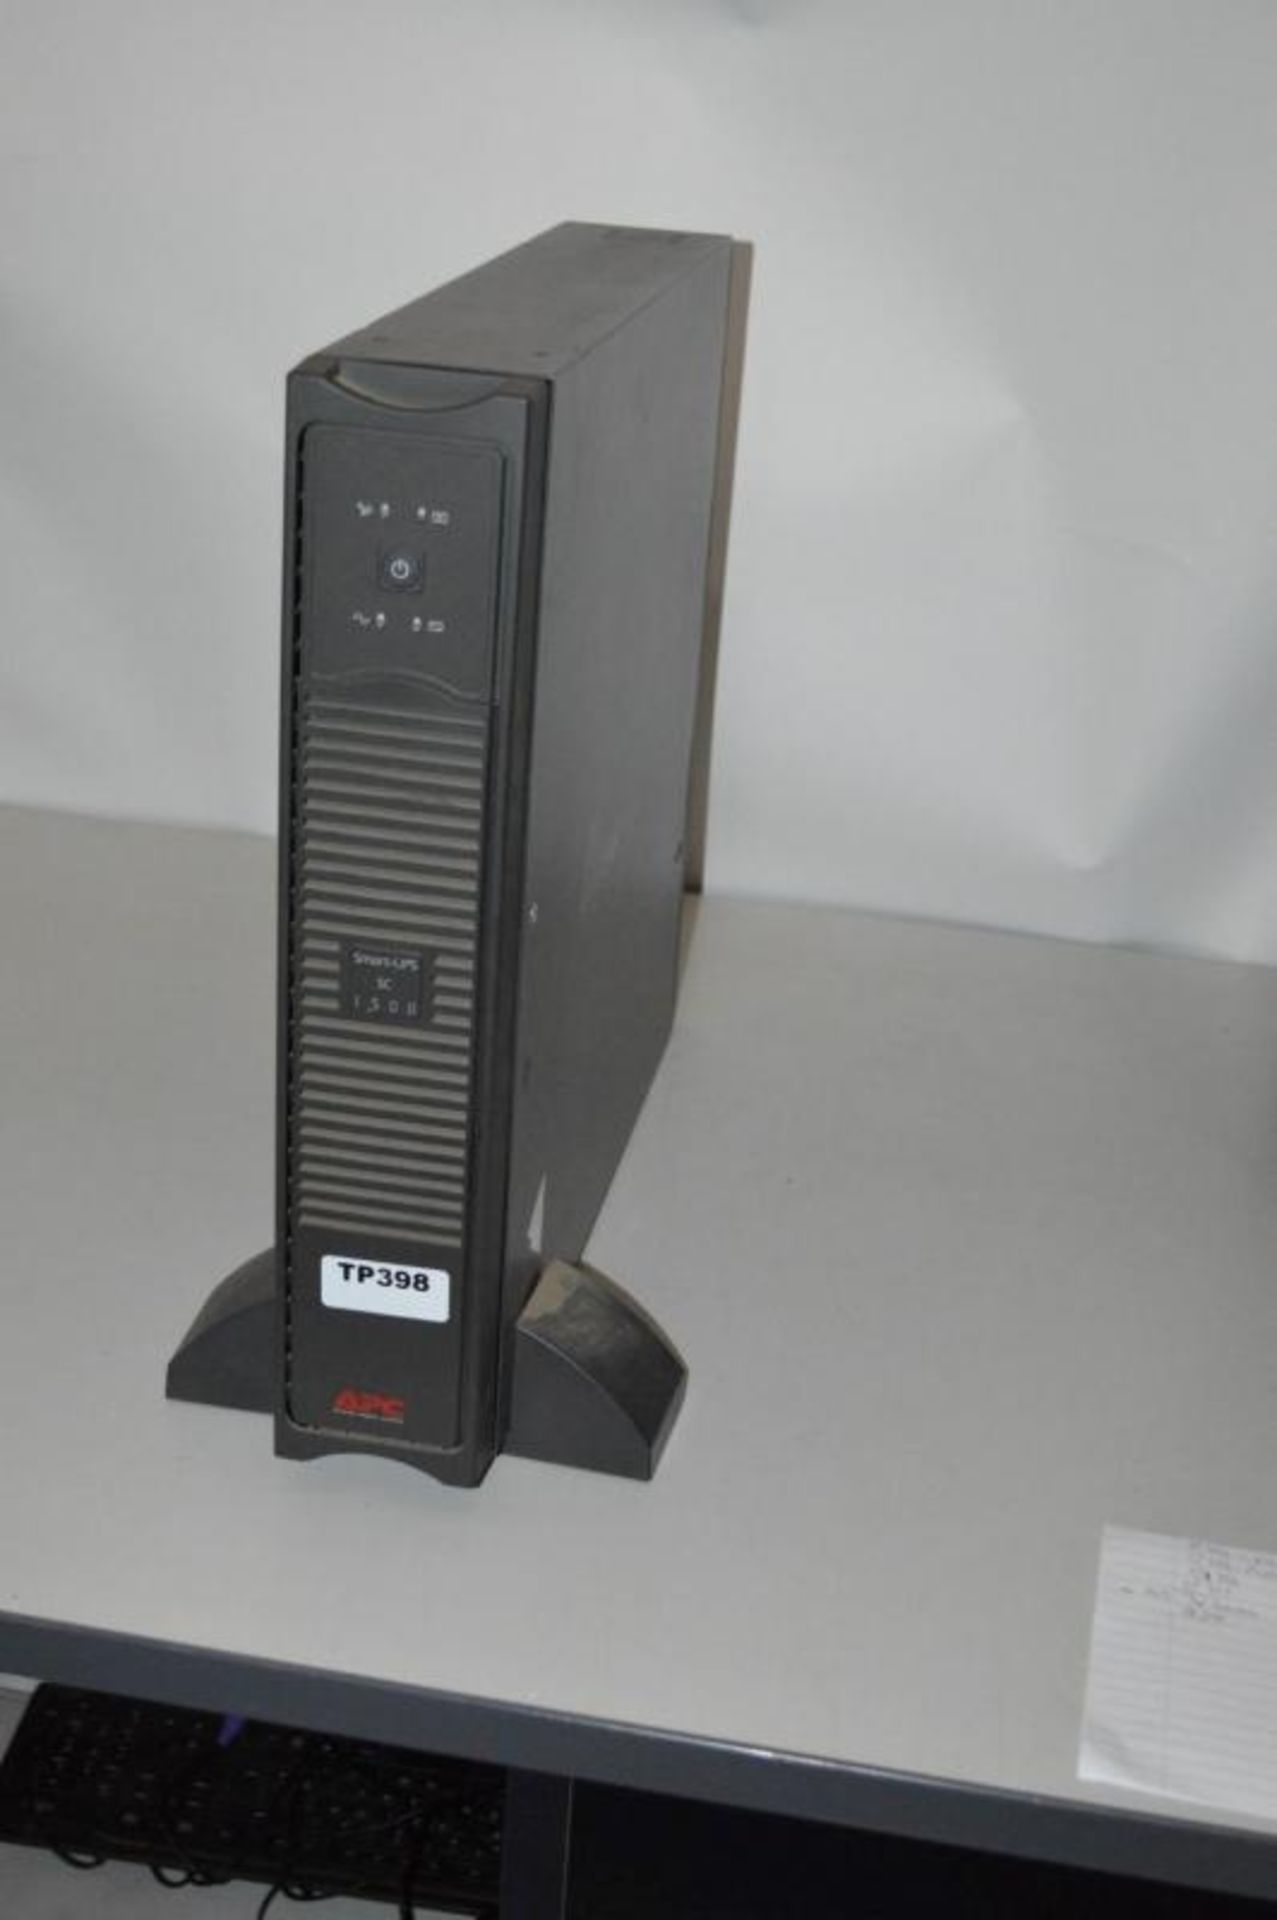 1 x APC Smart-UPS (1500 VA) Line Interactive (Come Out Of A Working Office Enviroment) - Ref TP398 - - Image 3 of 6